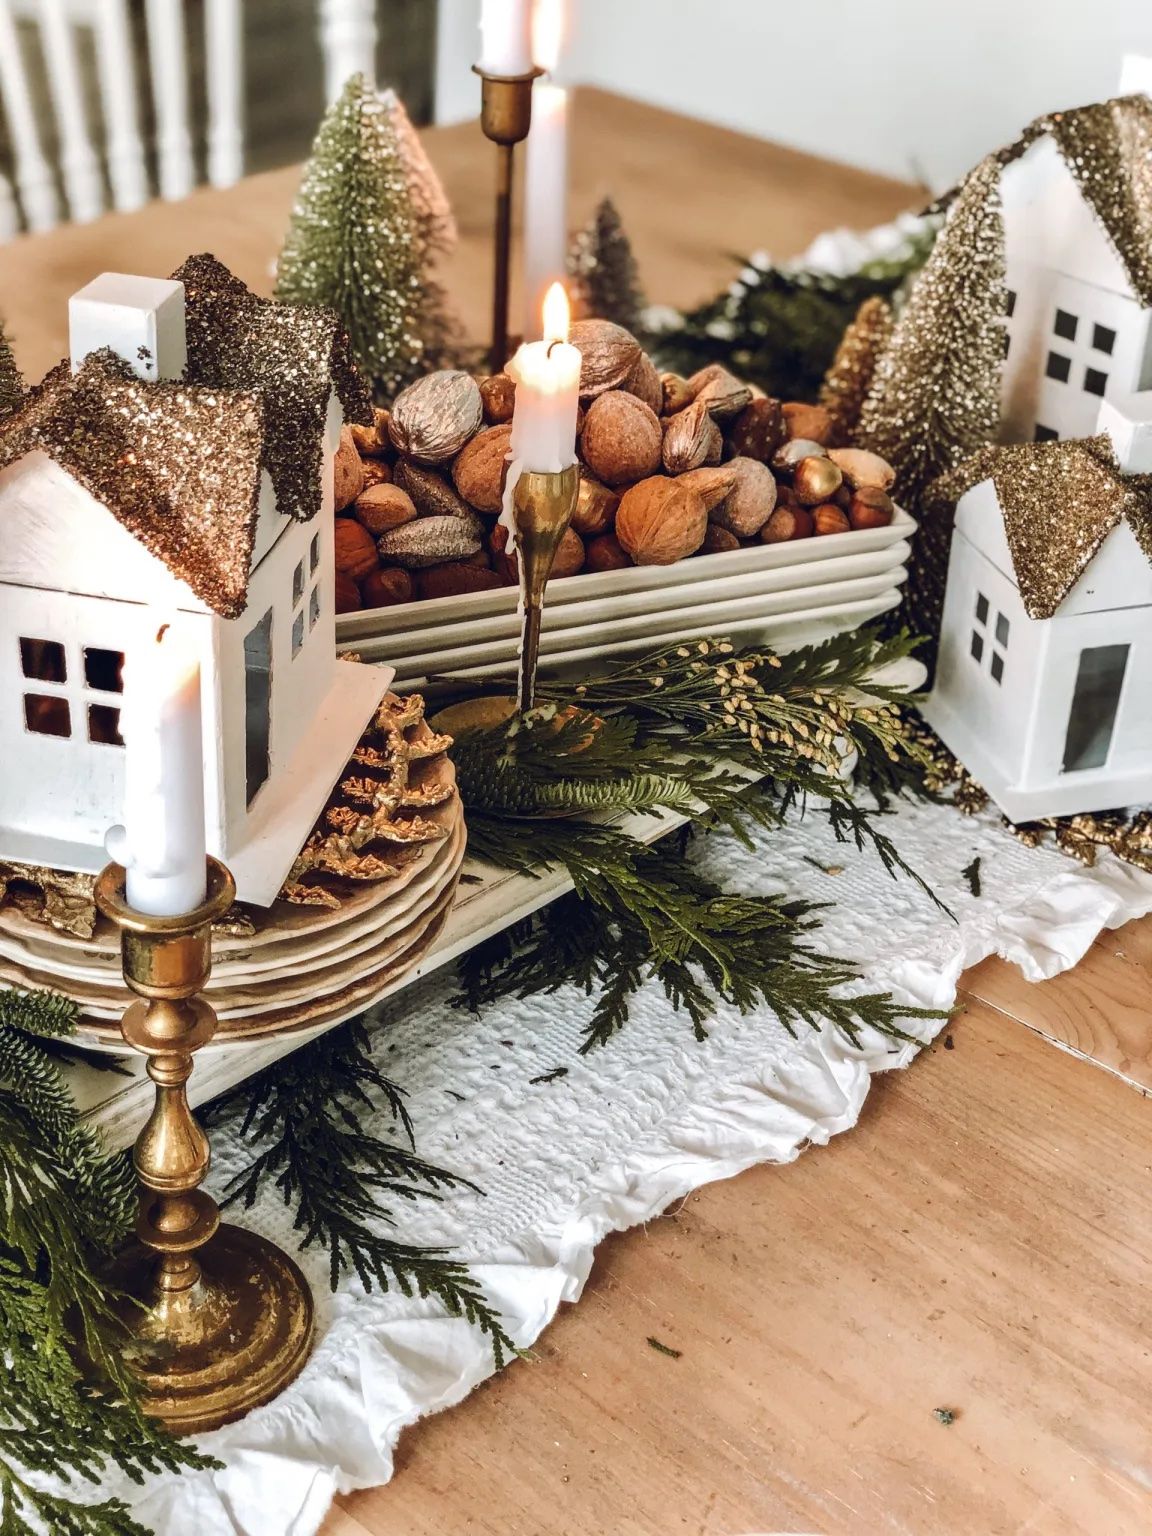 Aggregate more than 72 christmas table decorations centerpieces super hot